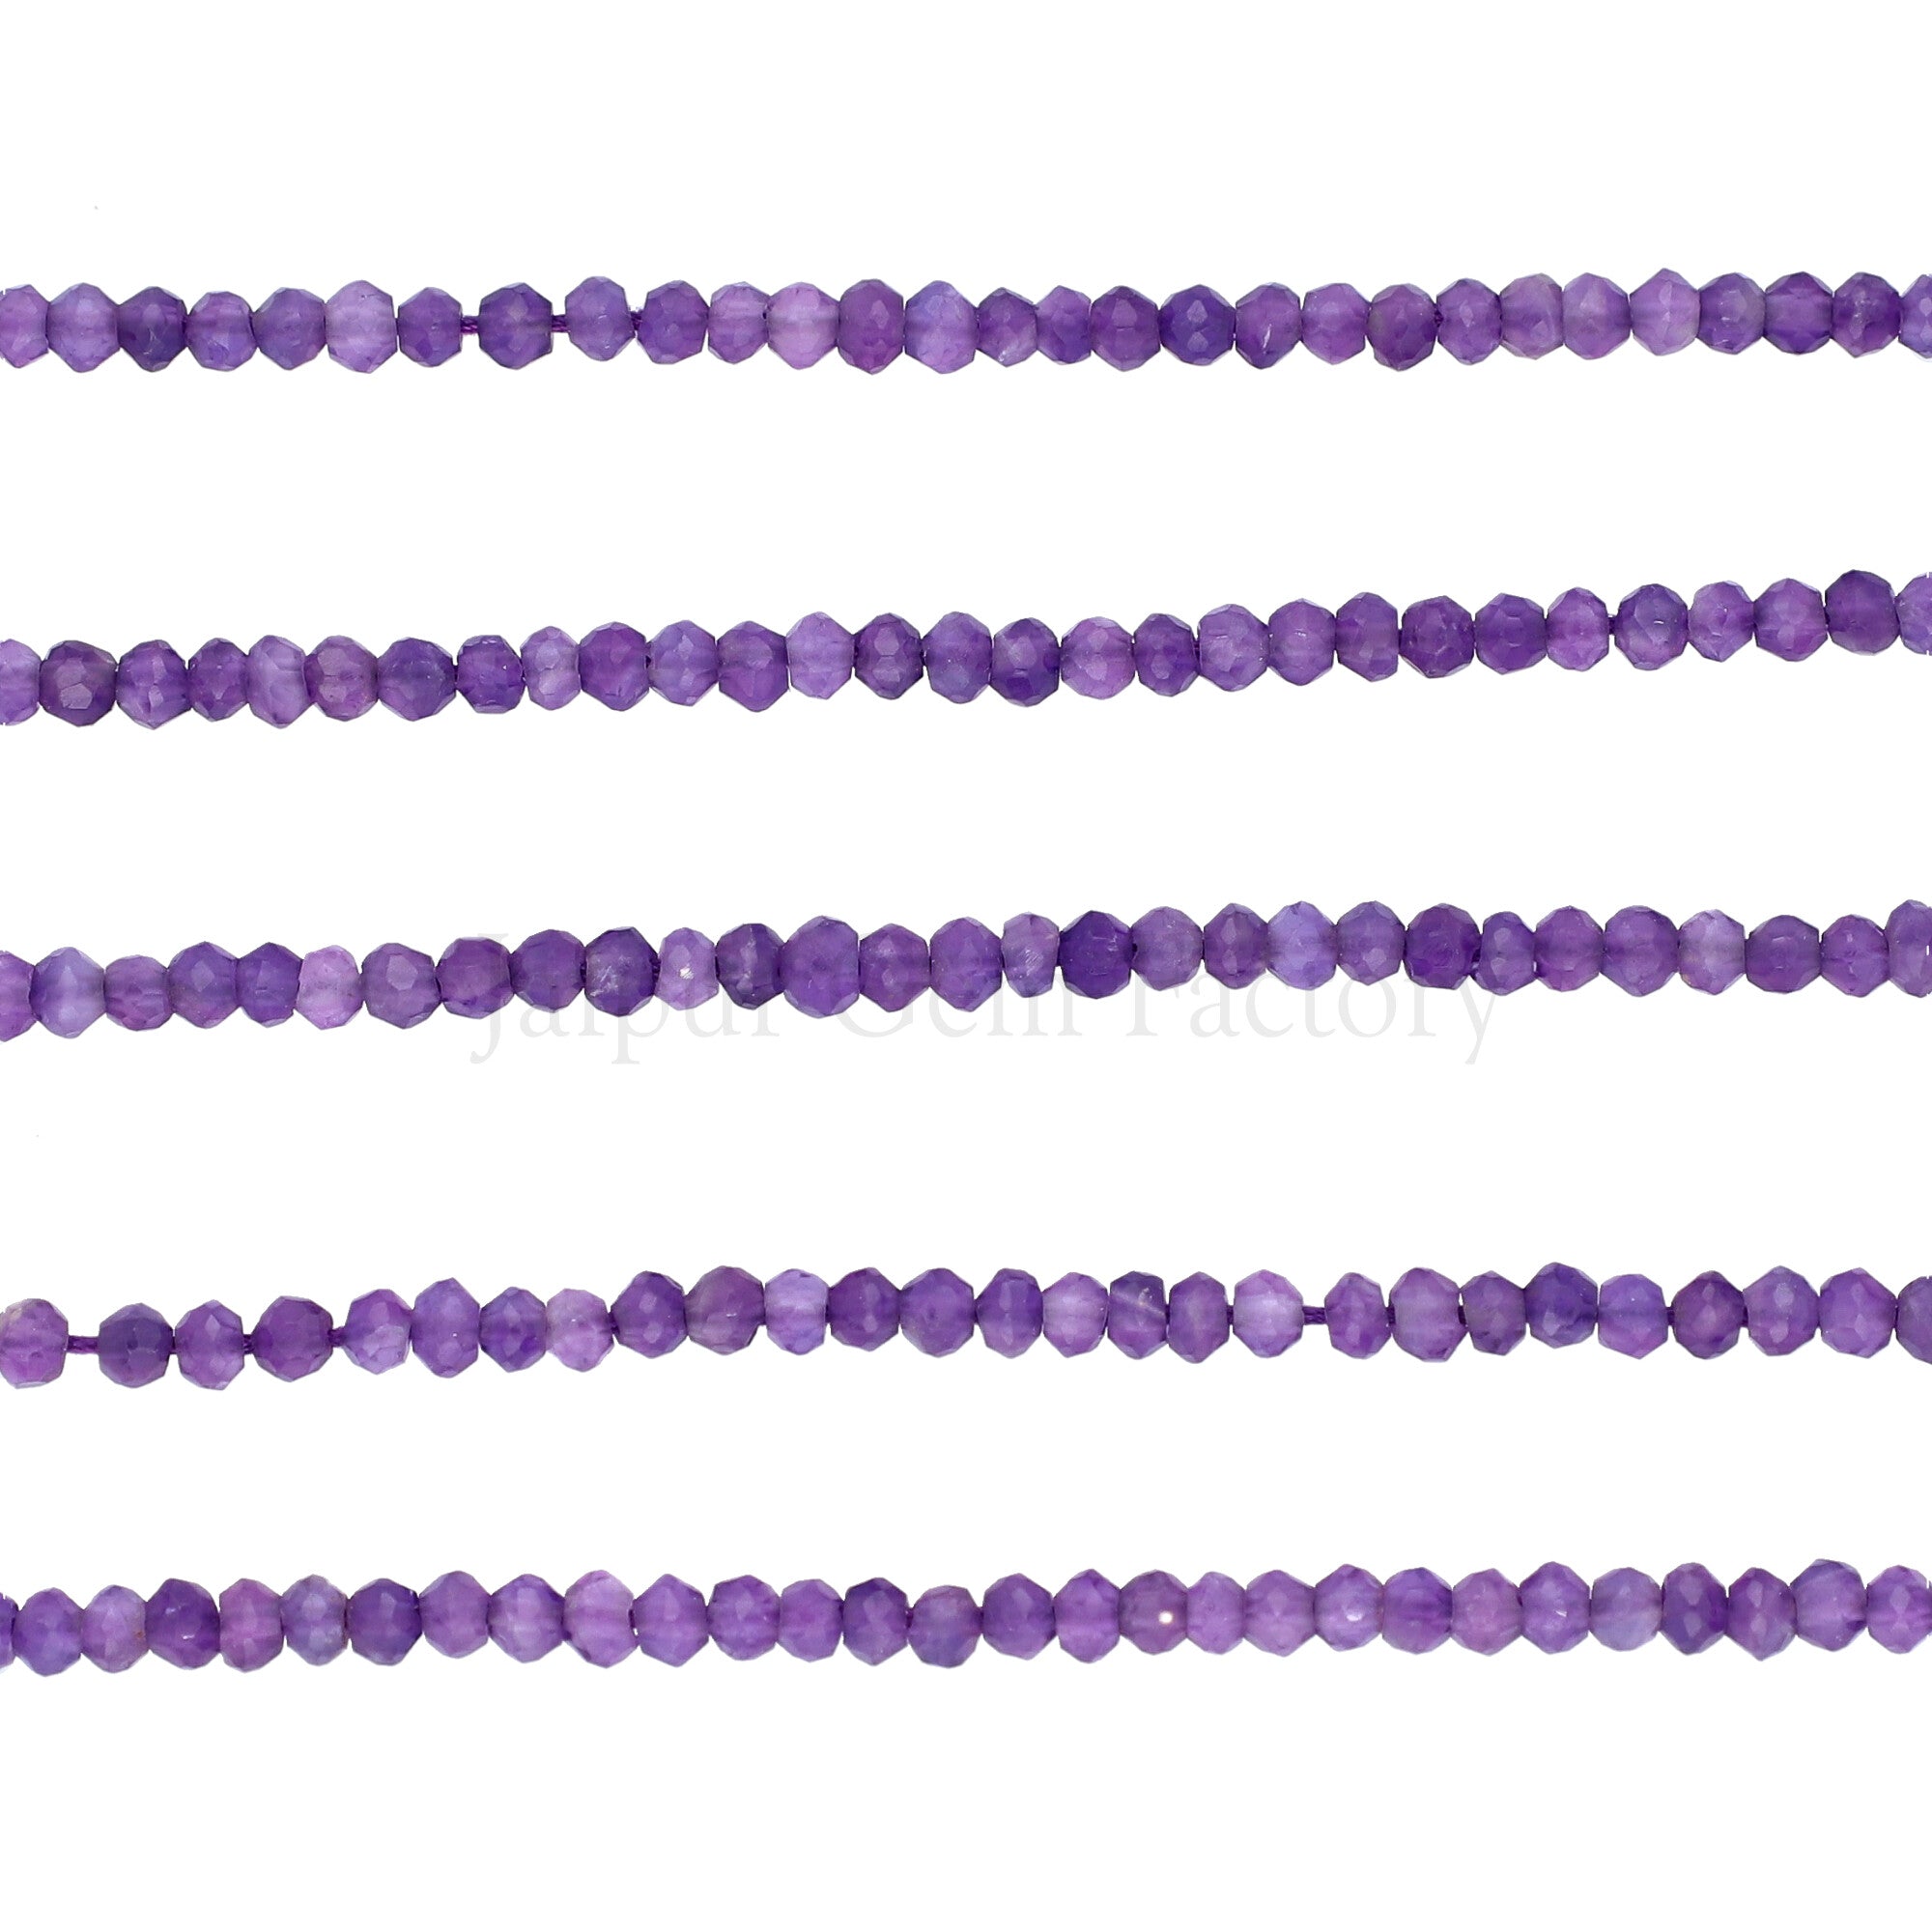 Amethyst 3.5 To 4 MM Faceted Rondelle Shape Beads Strand